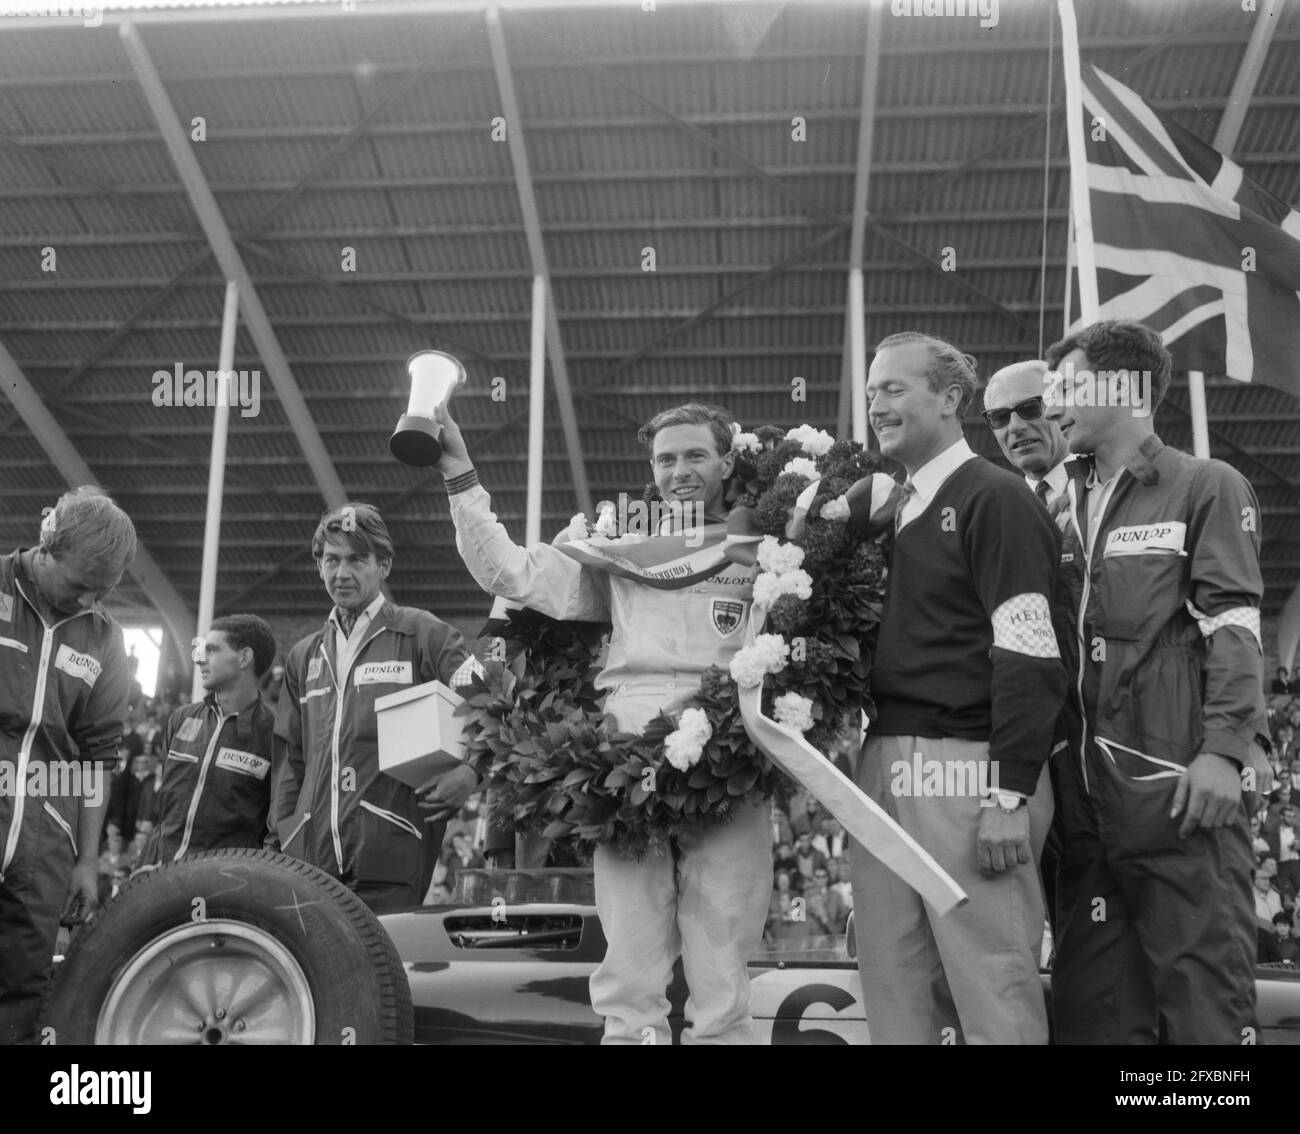 Jim Clark winner Grote Prijs van Nederland in 1963. With wreath and cup. Jim Clark, June 23 1963, Winners, cups, The Netherlands, 20th century press agency photo, news to remember, documentary, historic photography 1945-1990, visual stories, human history of the Twentieth Century, capturing moments in time Stock Photo